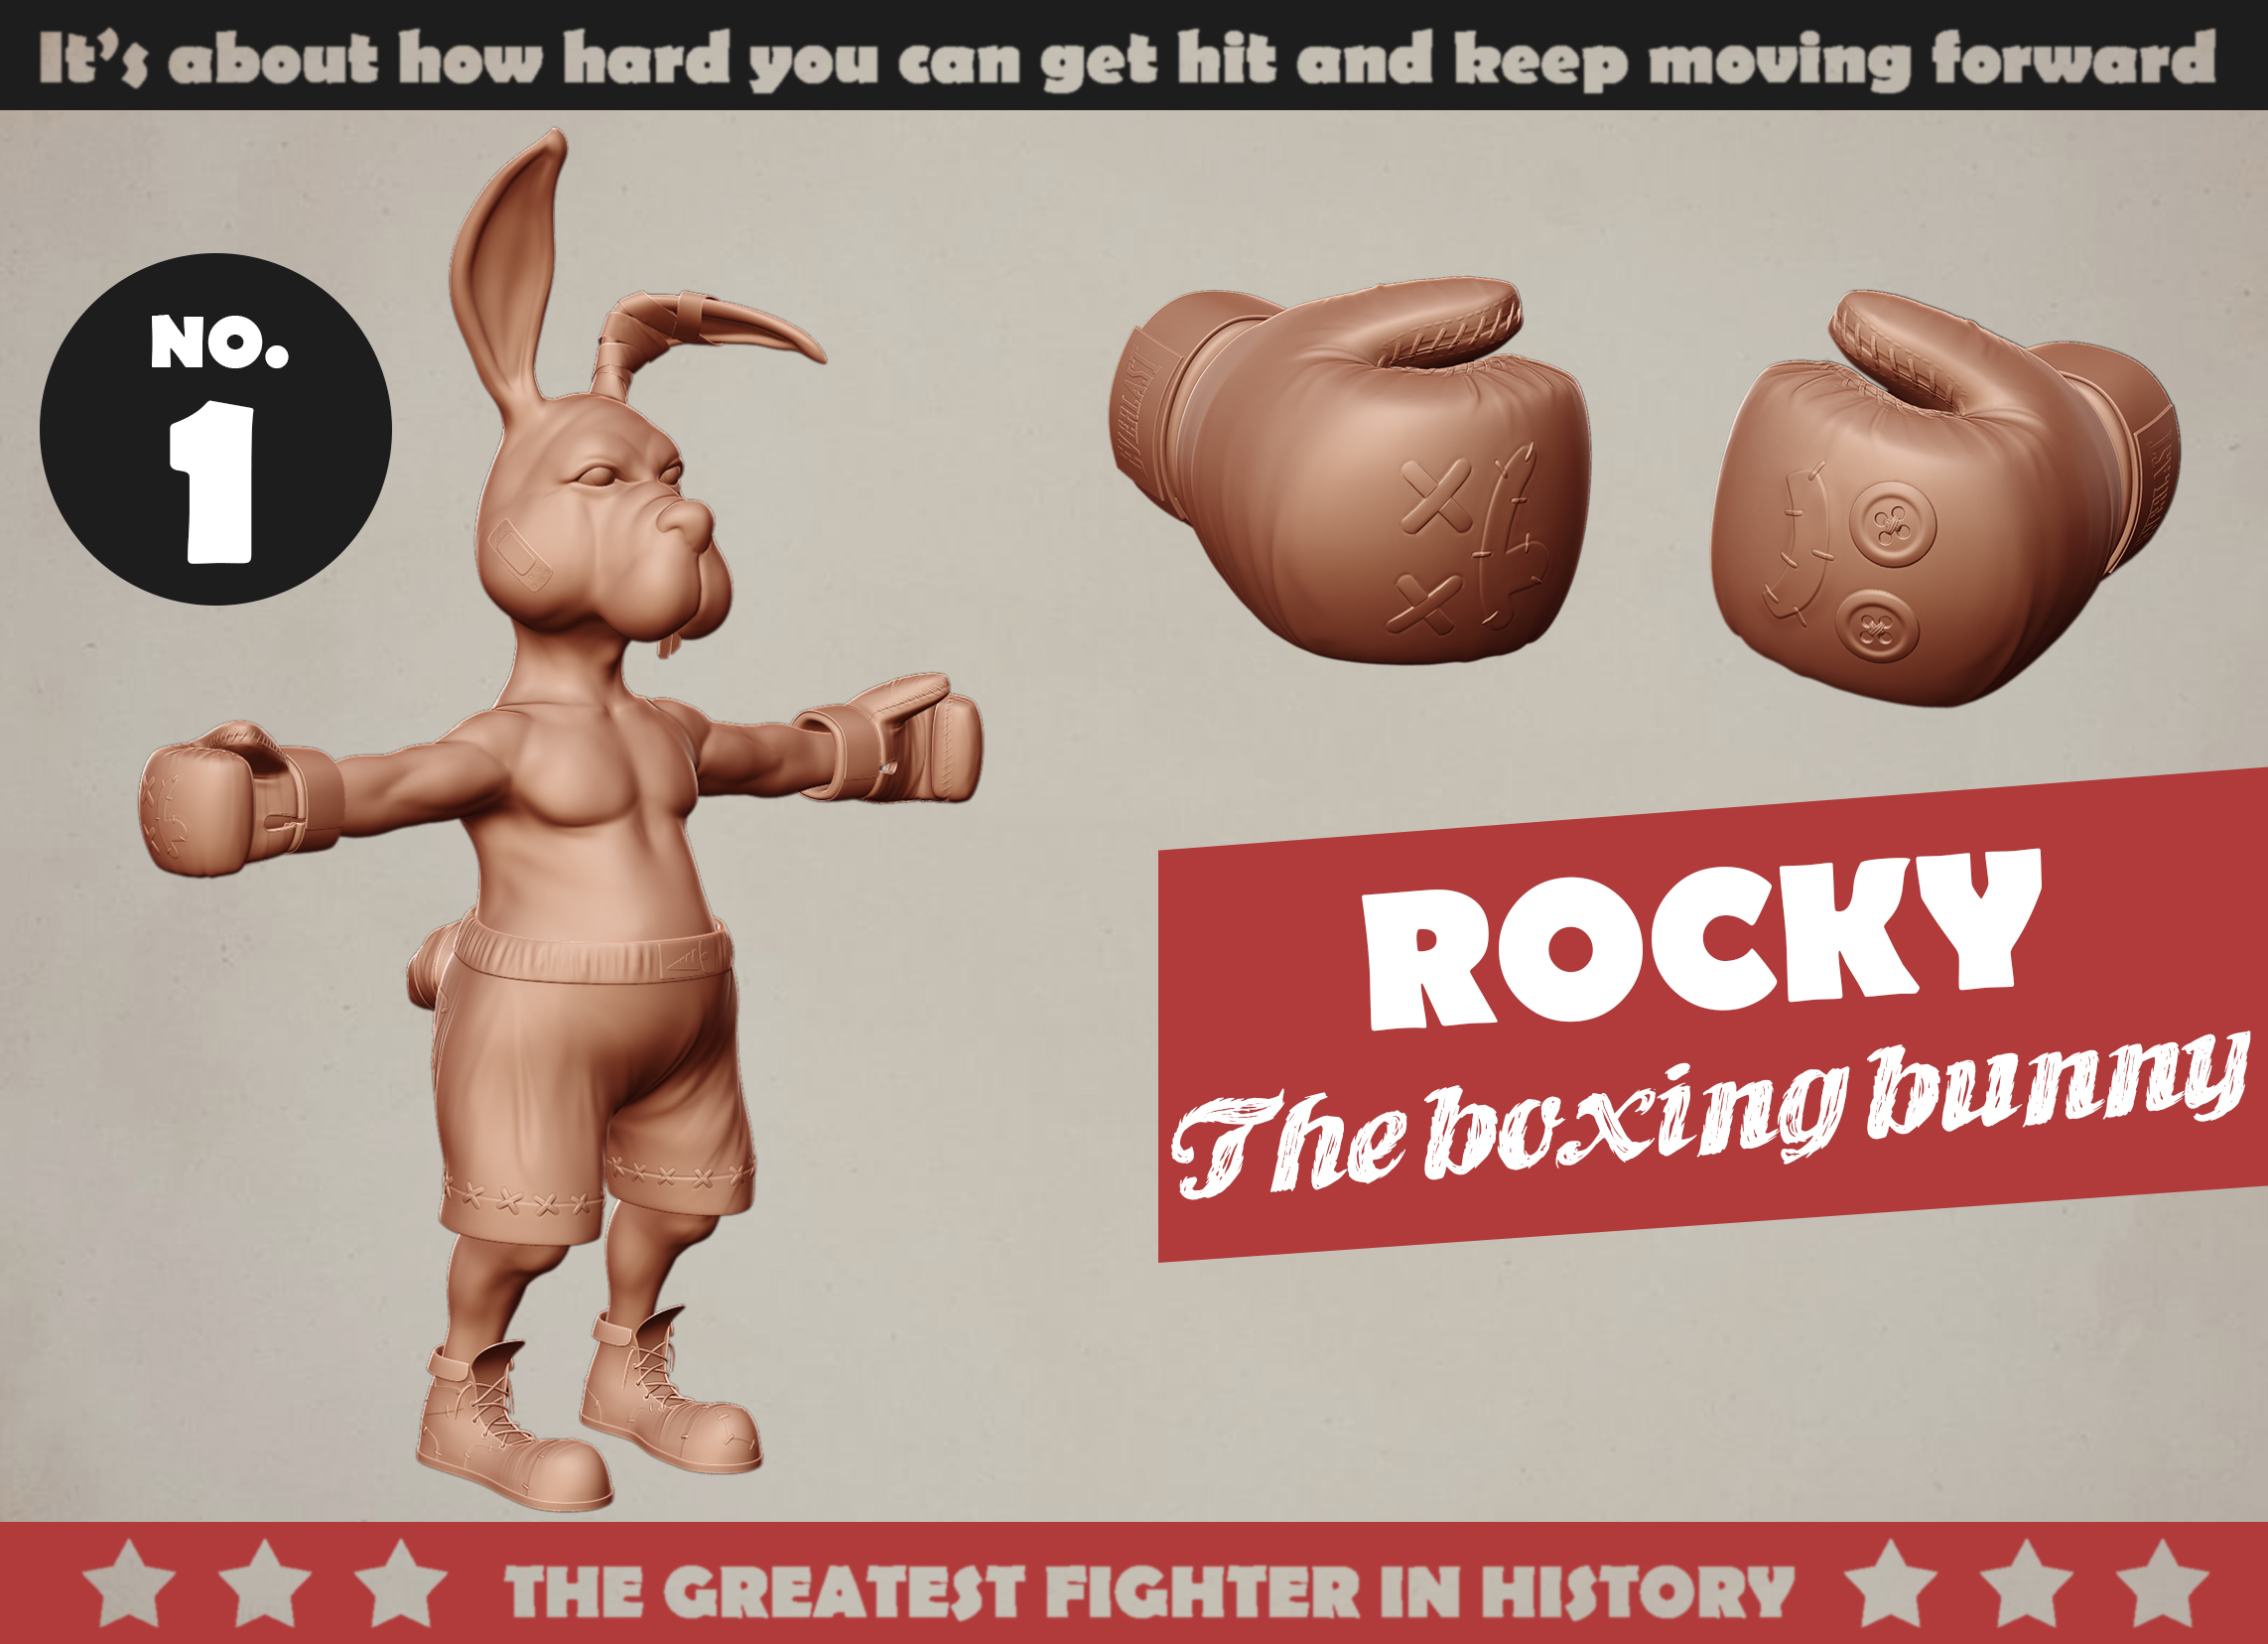 https://assist-software.net/Rocky%20the%20boxing%20bunny